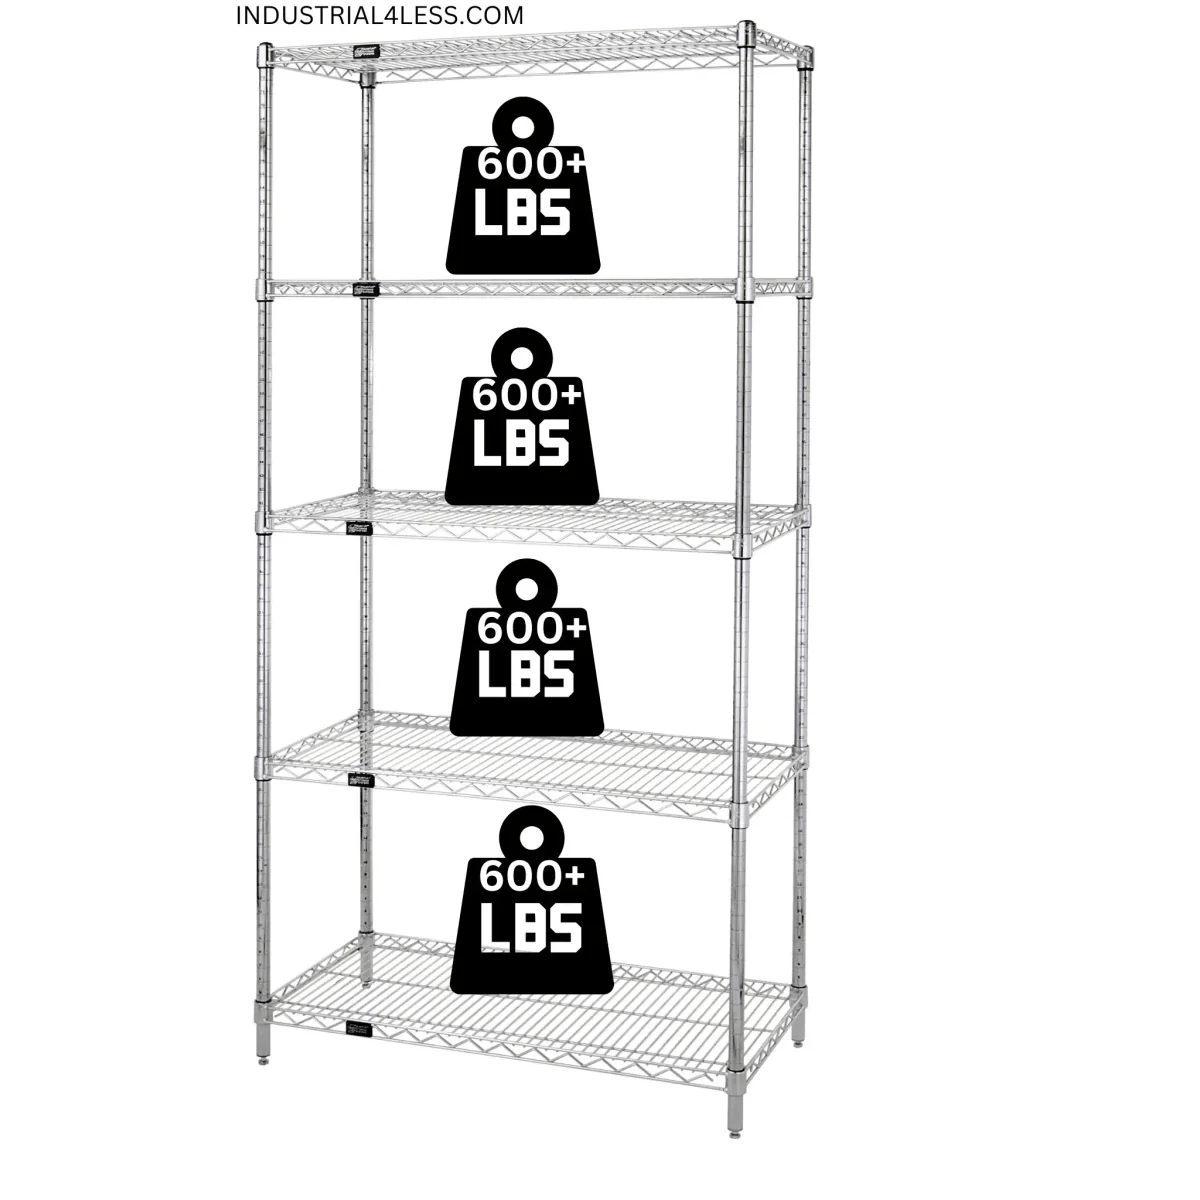 36" x 36" Stainless Steel Wire Shelving Unit - Industrial 4 Less - 36365S-5